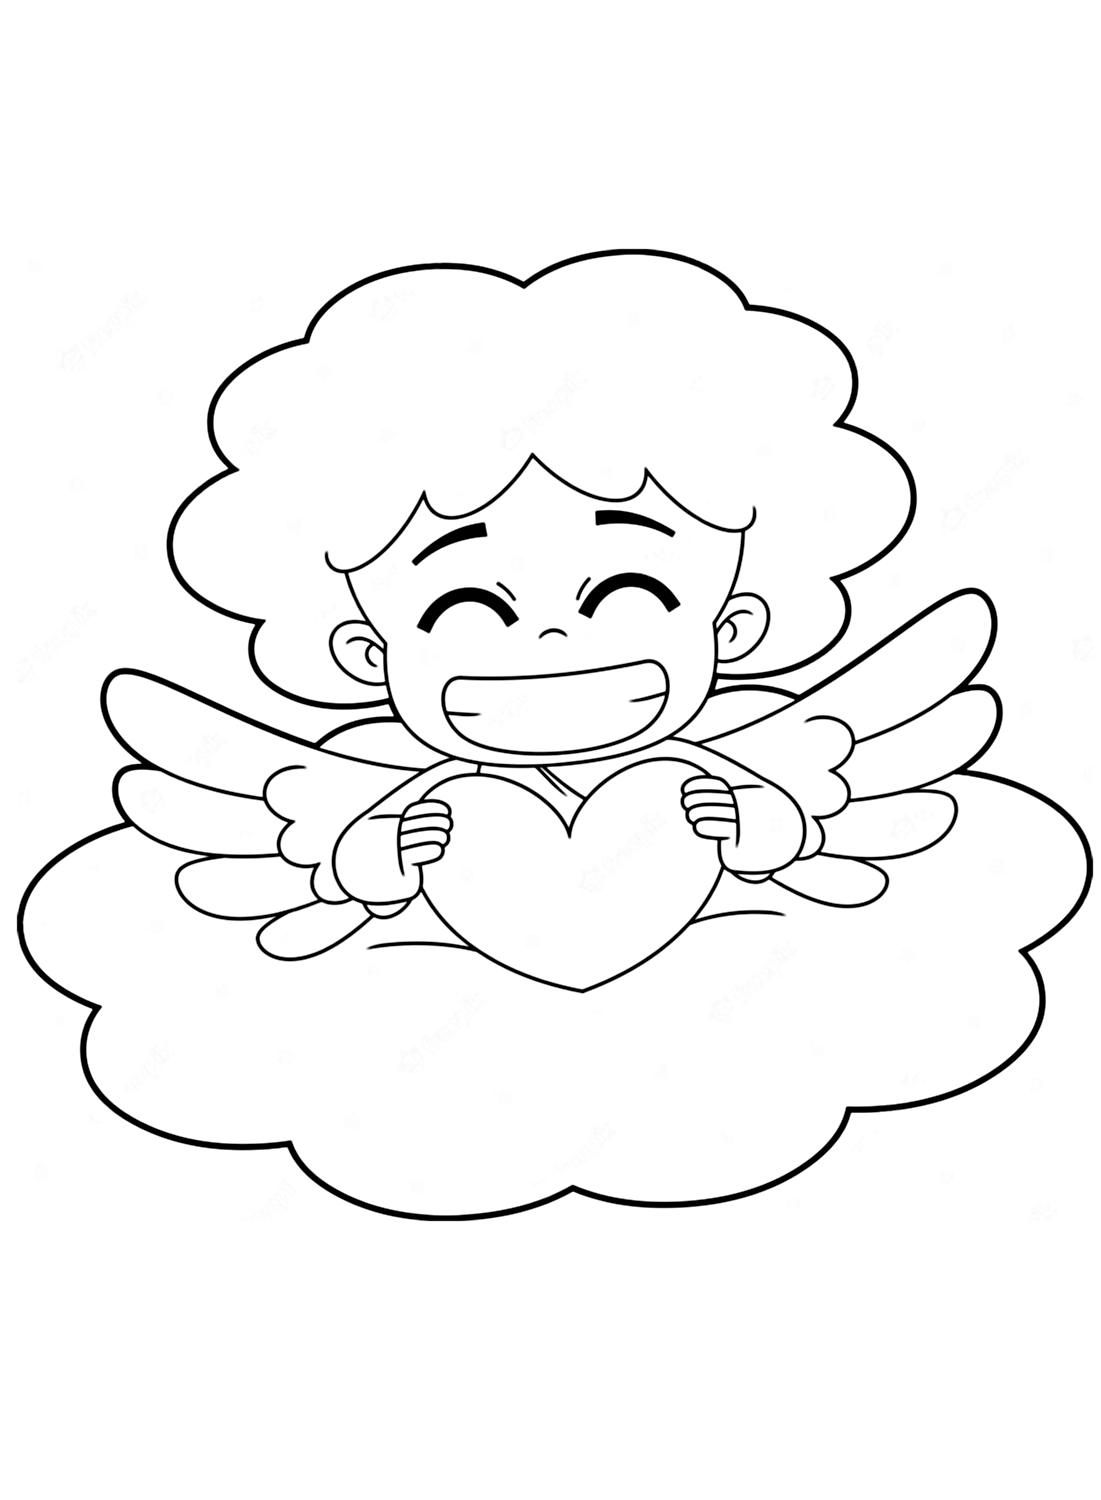 A smile Angel coloring page from Angel